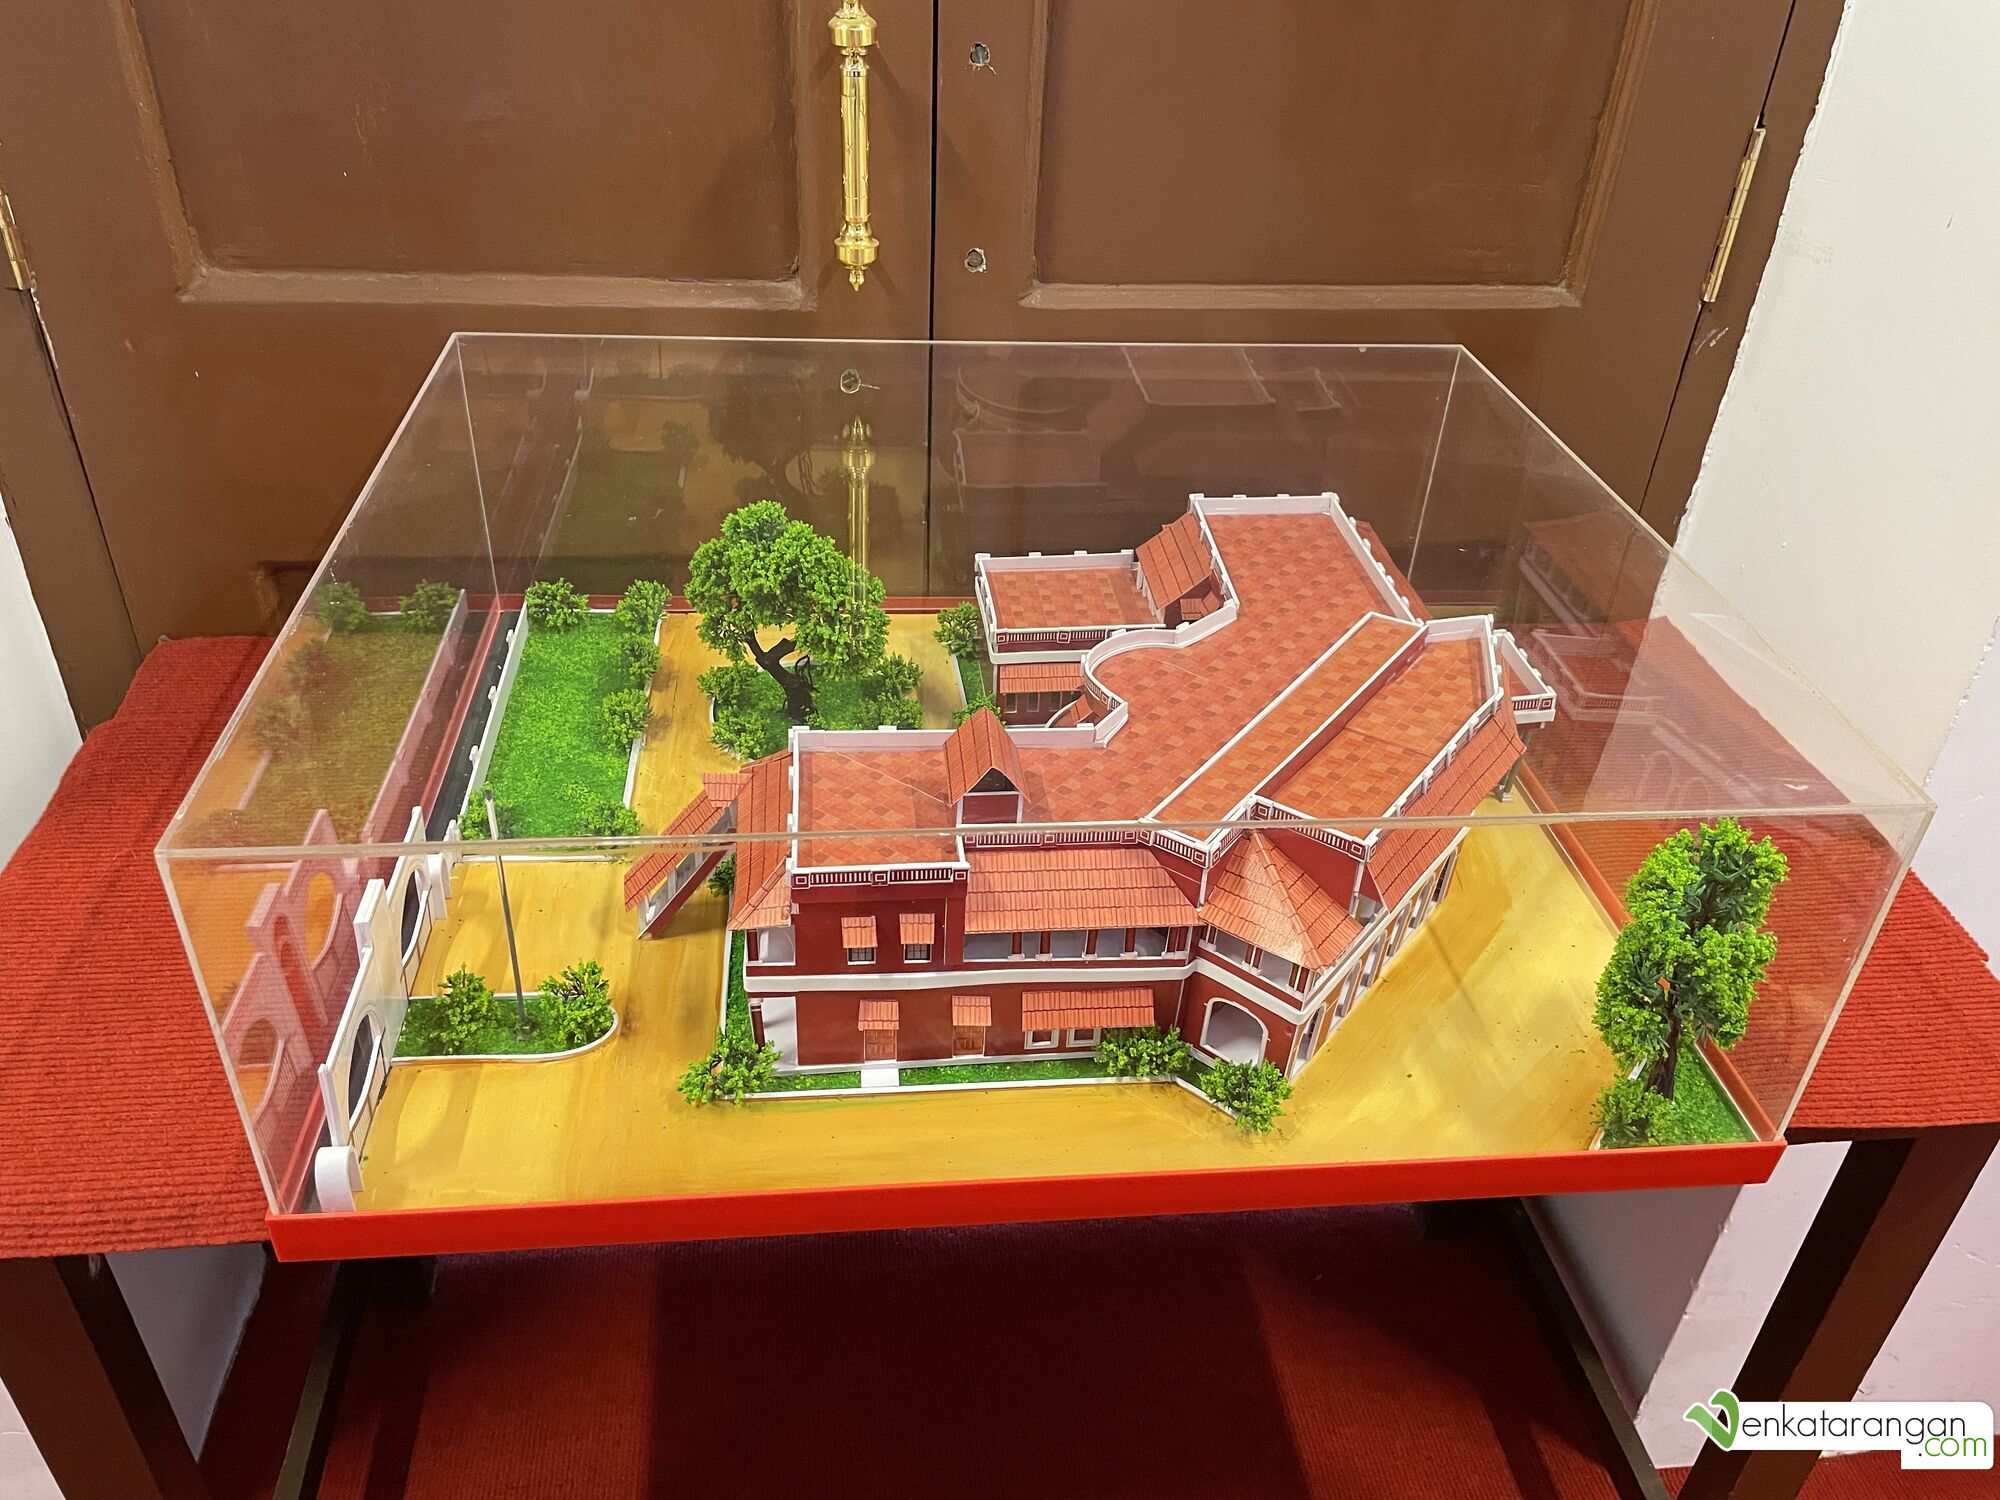 A small model of the building housing Tamil Nadu Police Museum